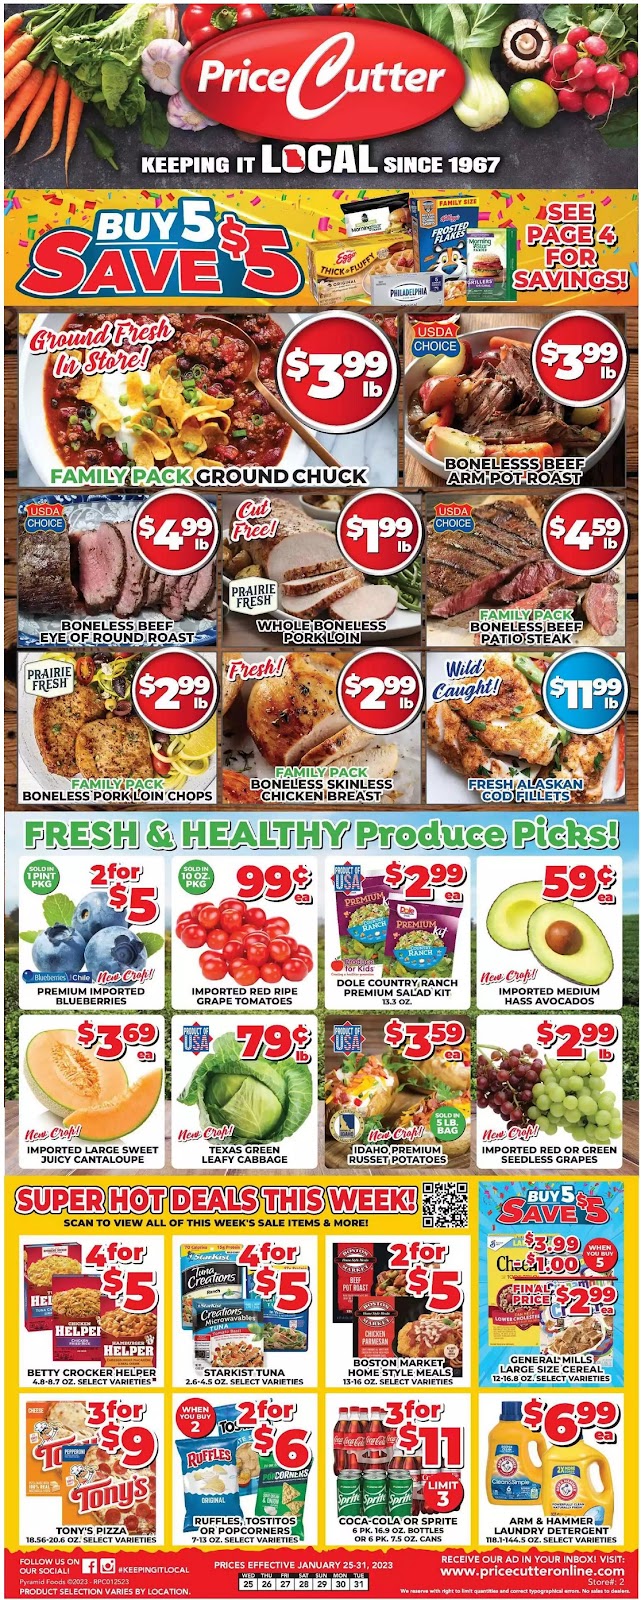 Price Cutter Weekly Ad